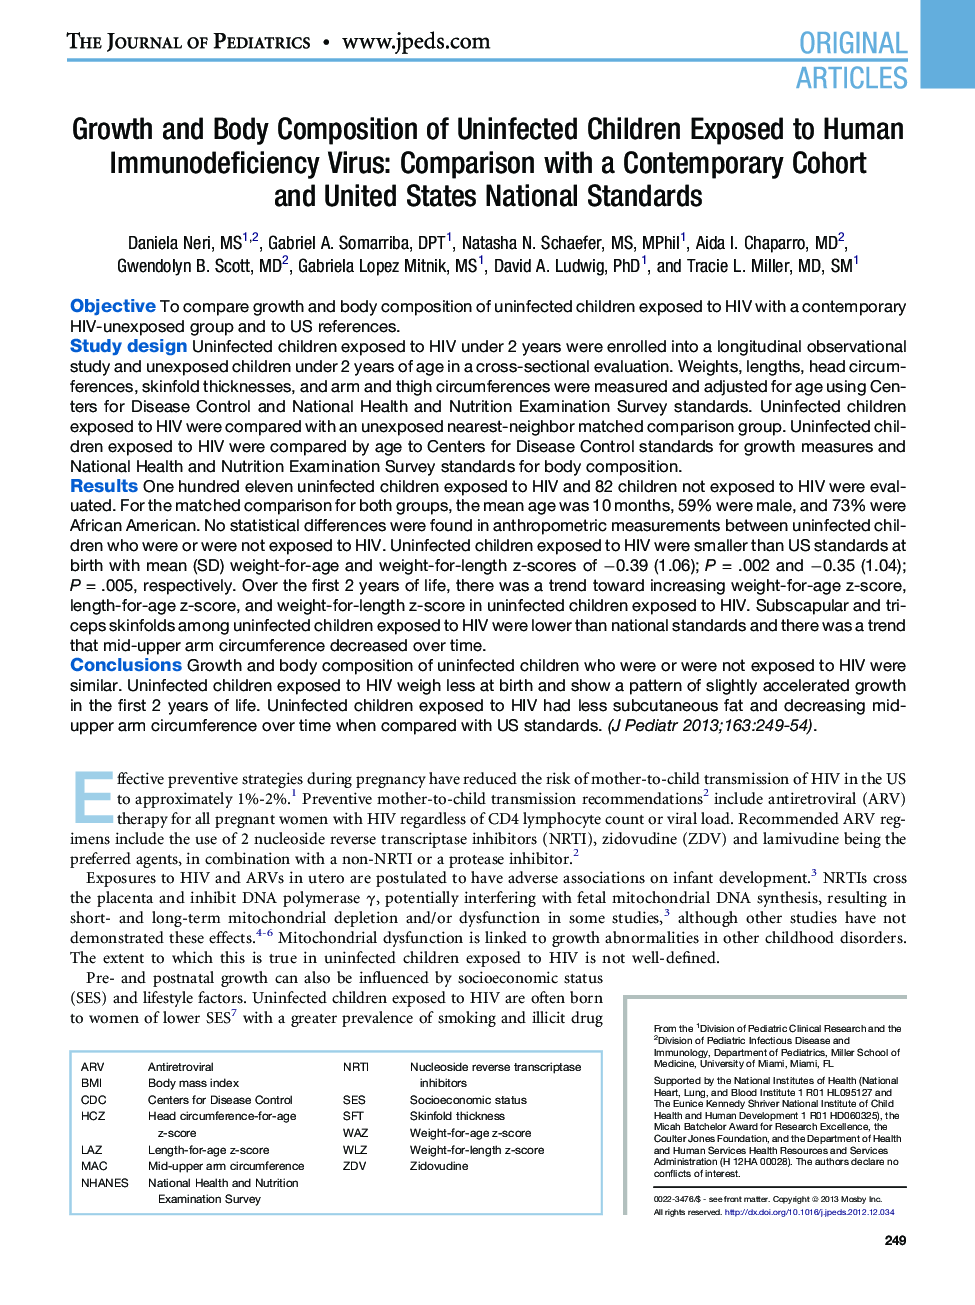 Growth and Body Composition of Uninfected Children Exposed to Human Immunodeficiency Virus: Comparison with a Contemporary Cohort andÂ United States National Standards